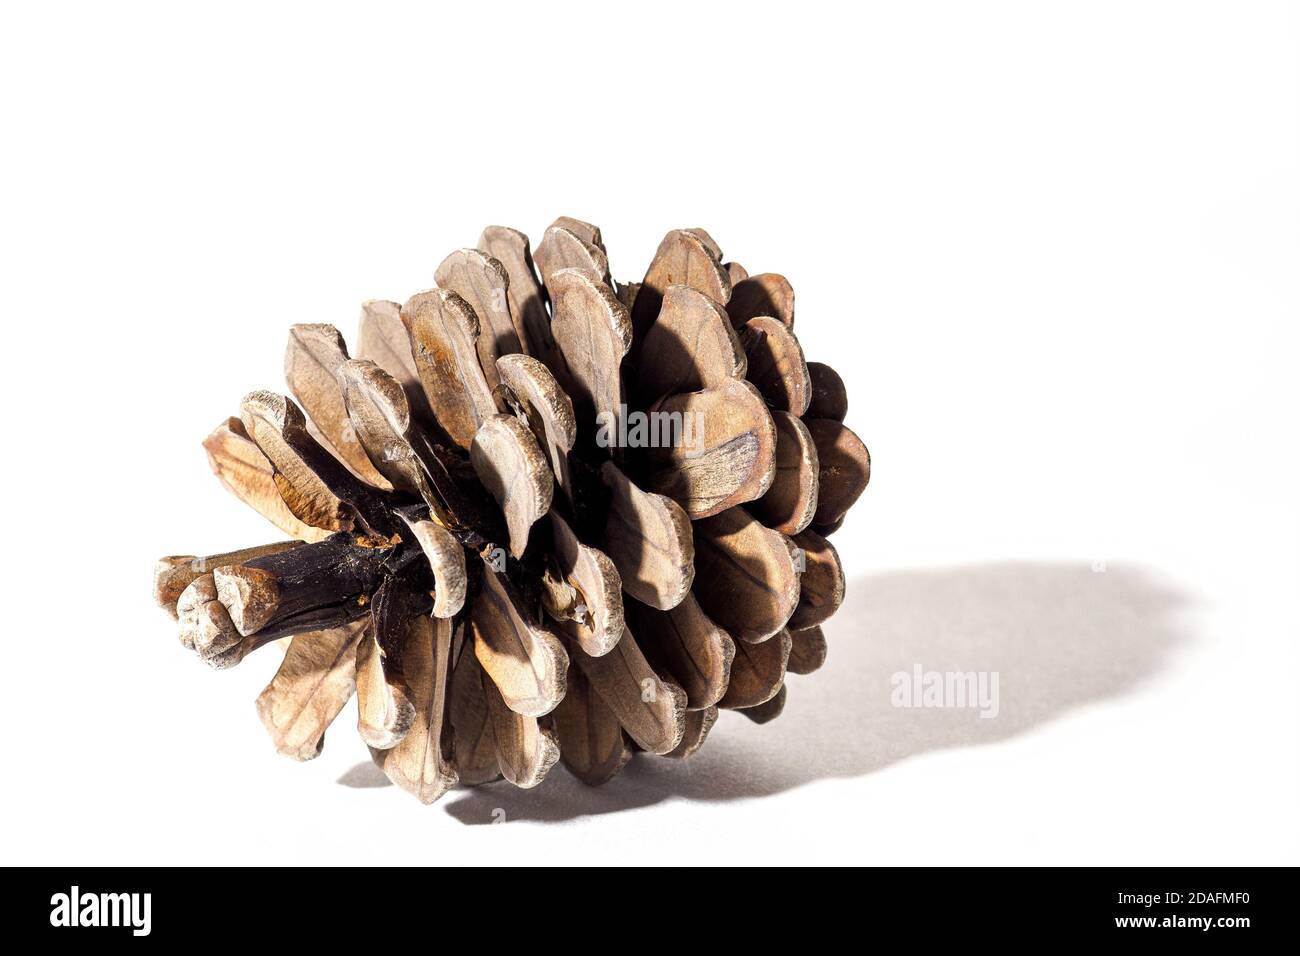 One pine cone on white background, side view, selective focus Stock Photo